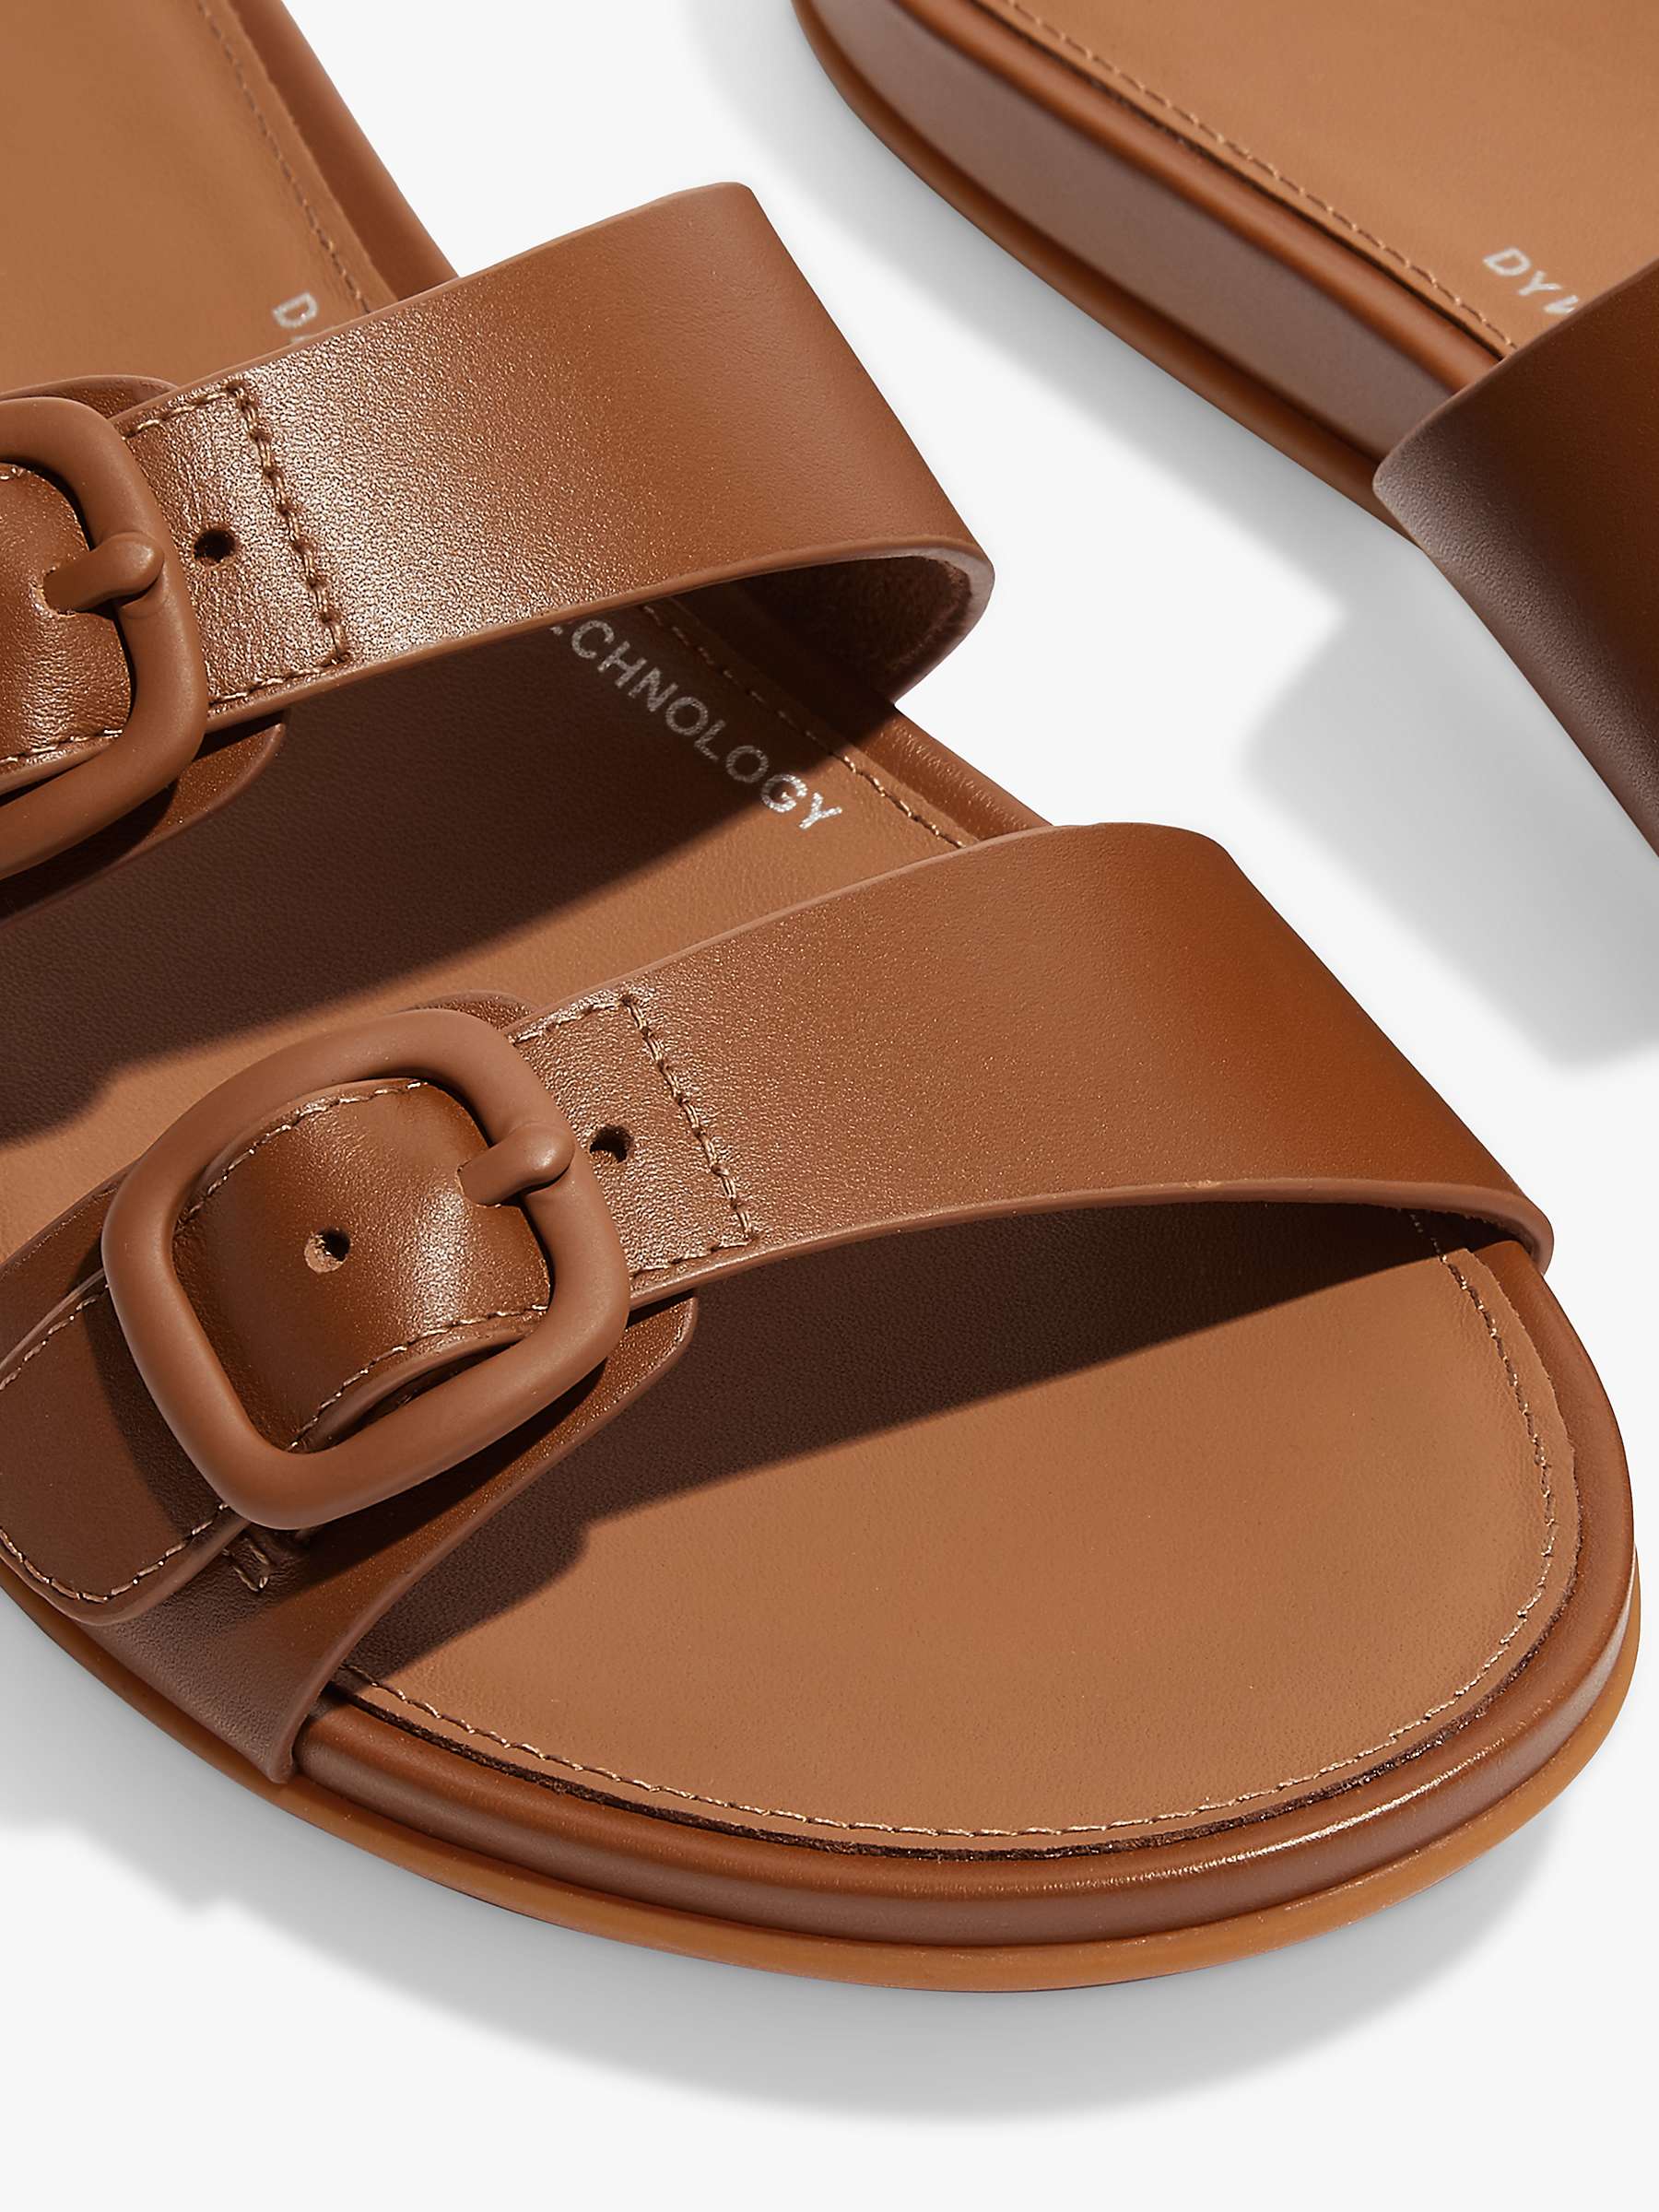 Buy FitFlop Gracie Leather Two Strap Slider Sandals Online at johnlewis.com